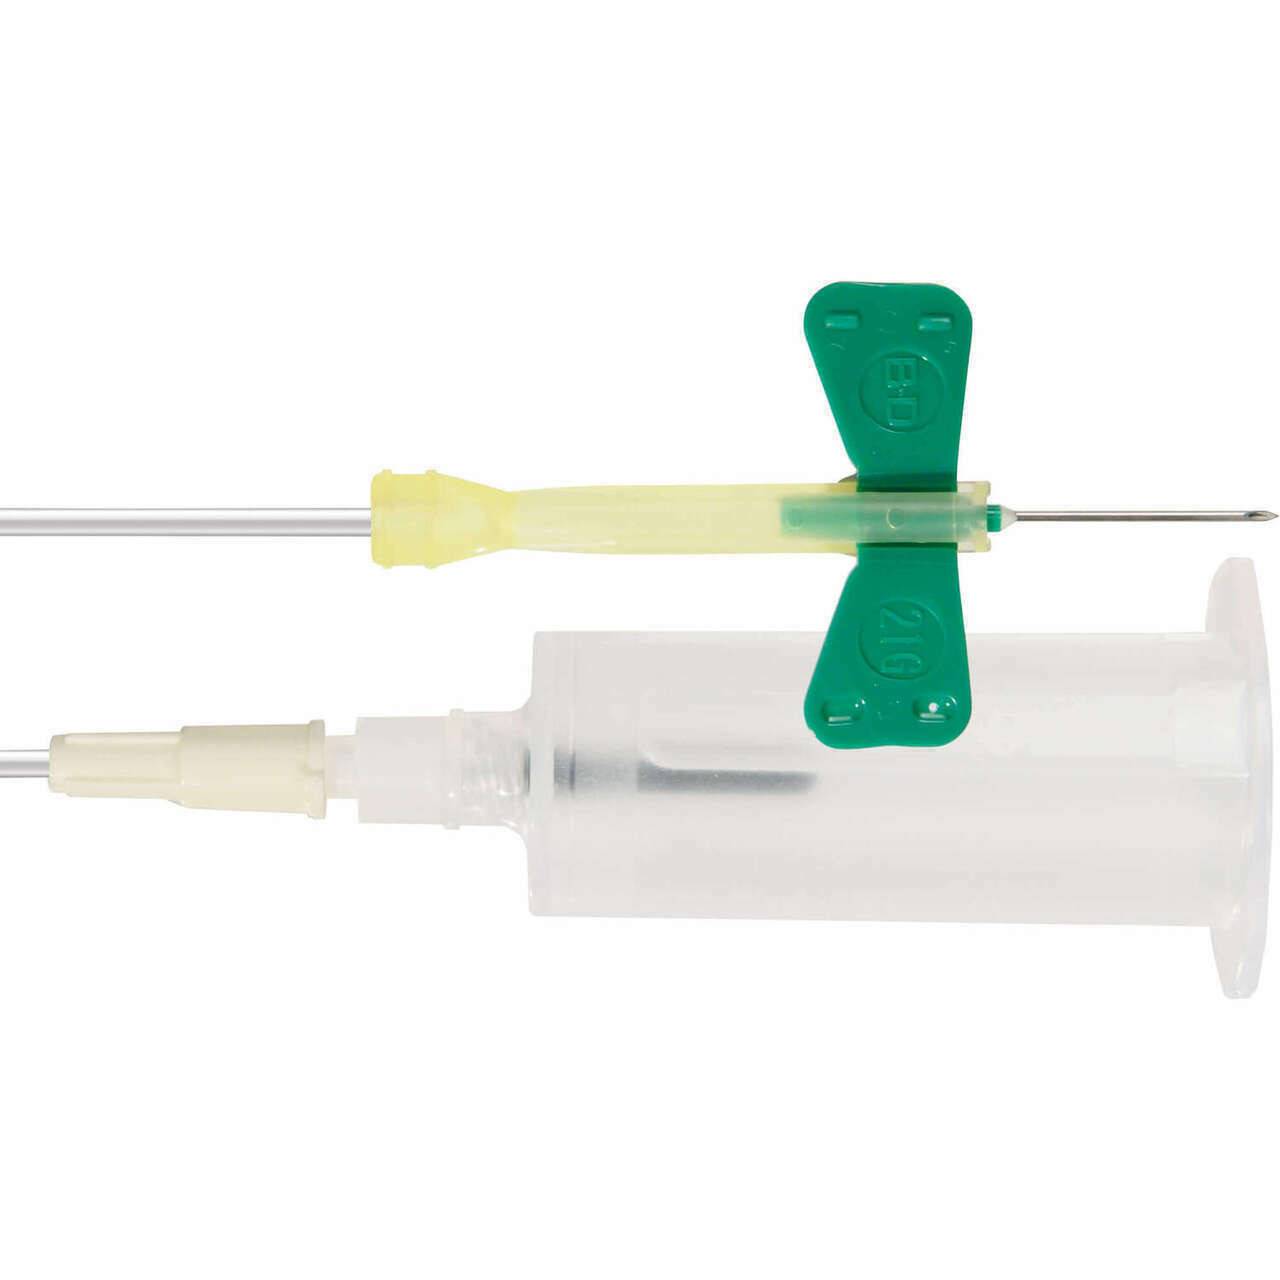 21g Green BD Vacutainer Safety Lok Blood Collection Set 7" Tubing